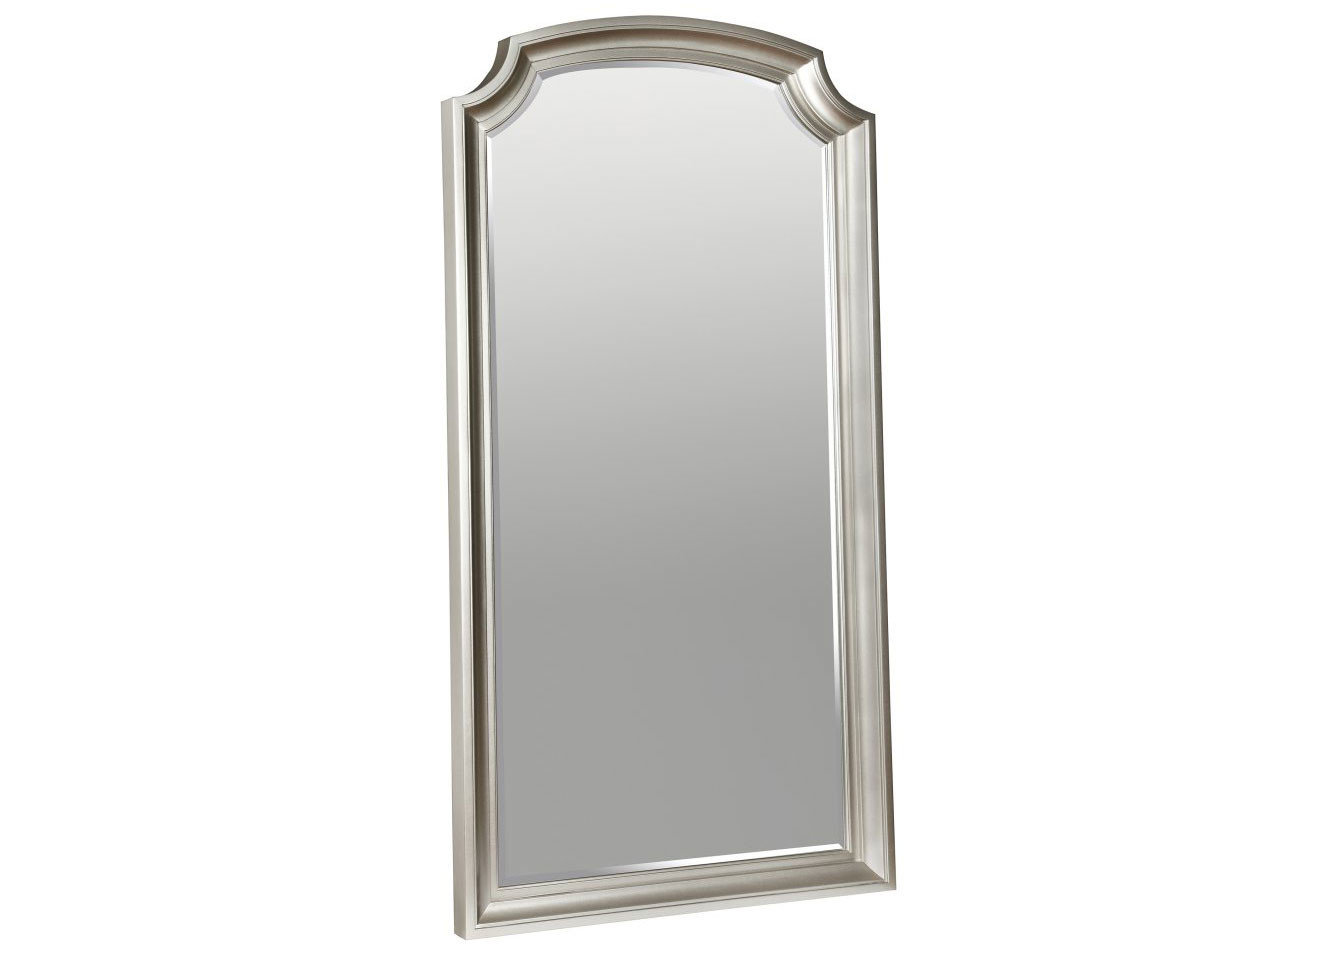 Style + Design Travel Shop indoor bathroom mirror product design angle rectangle